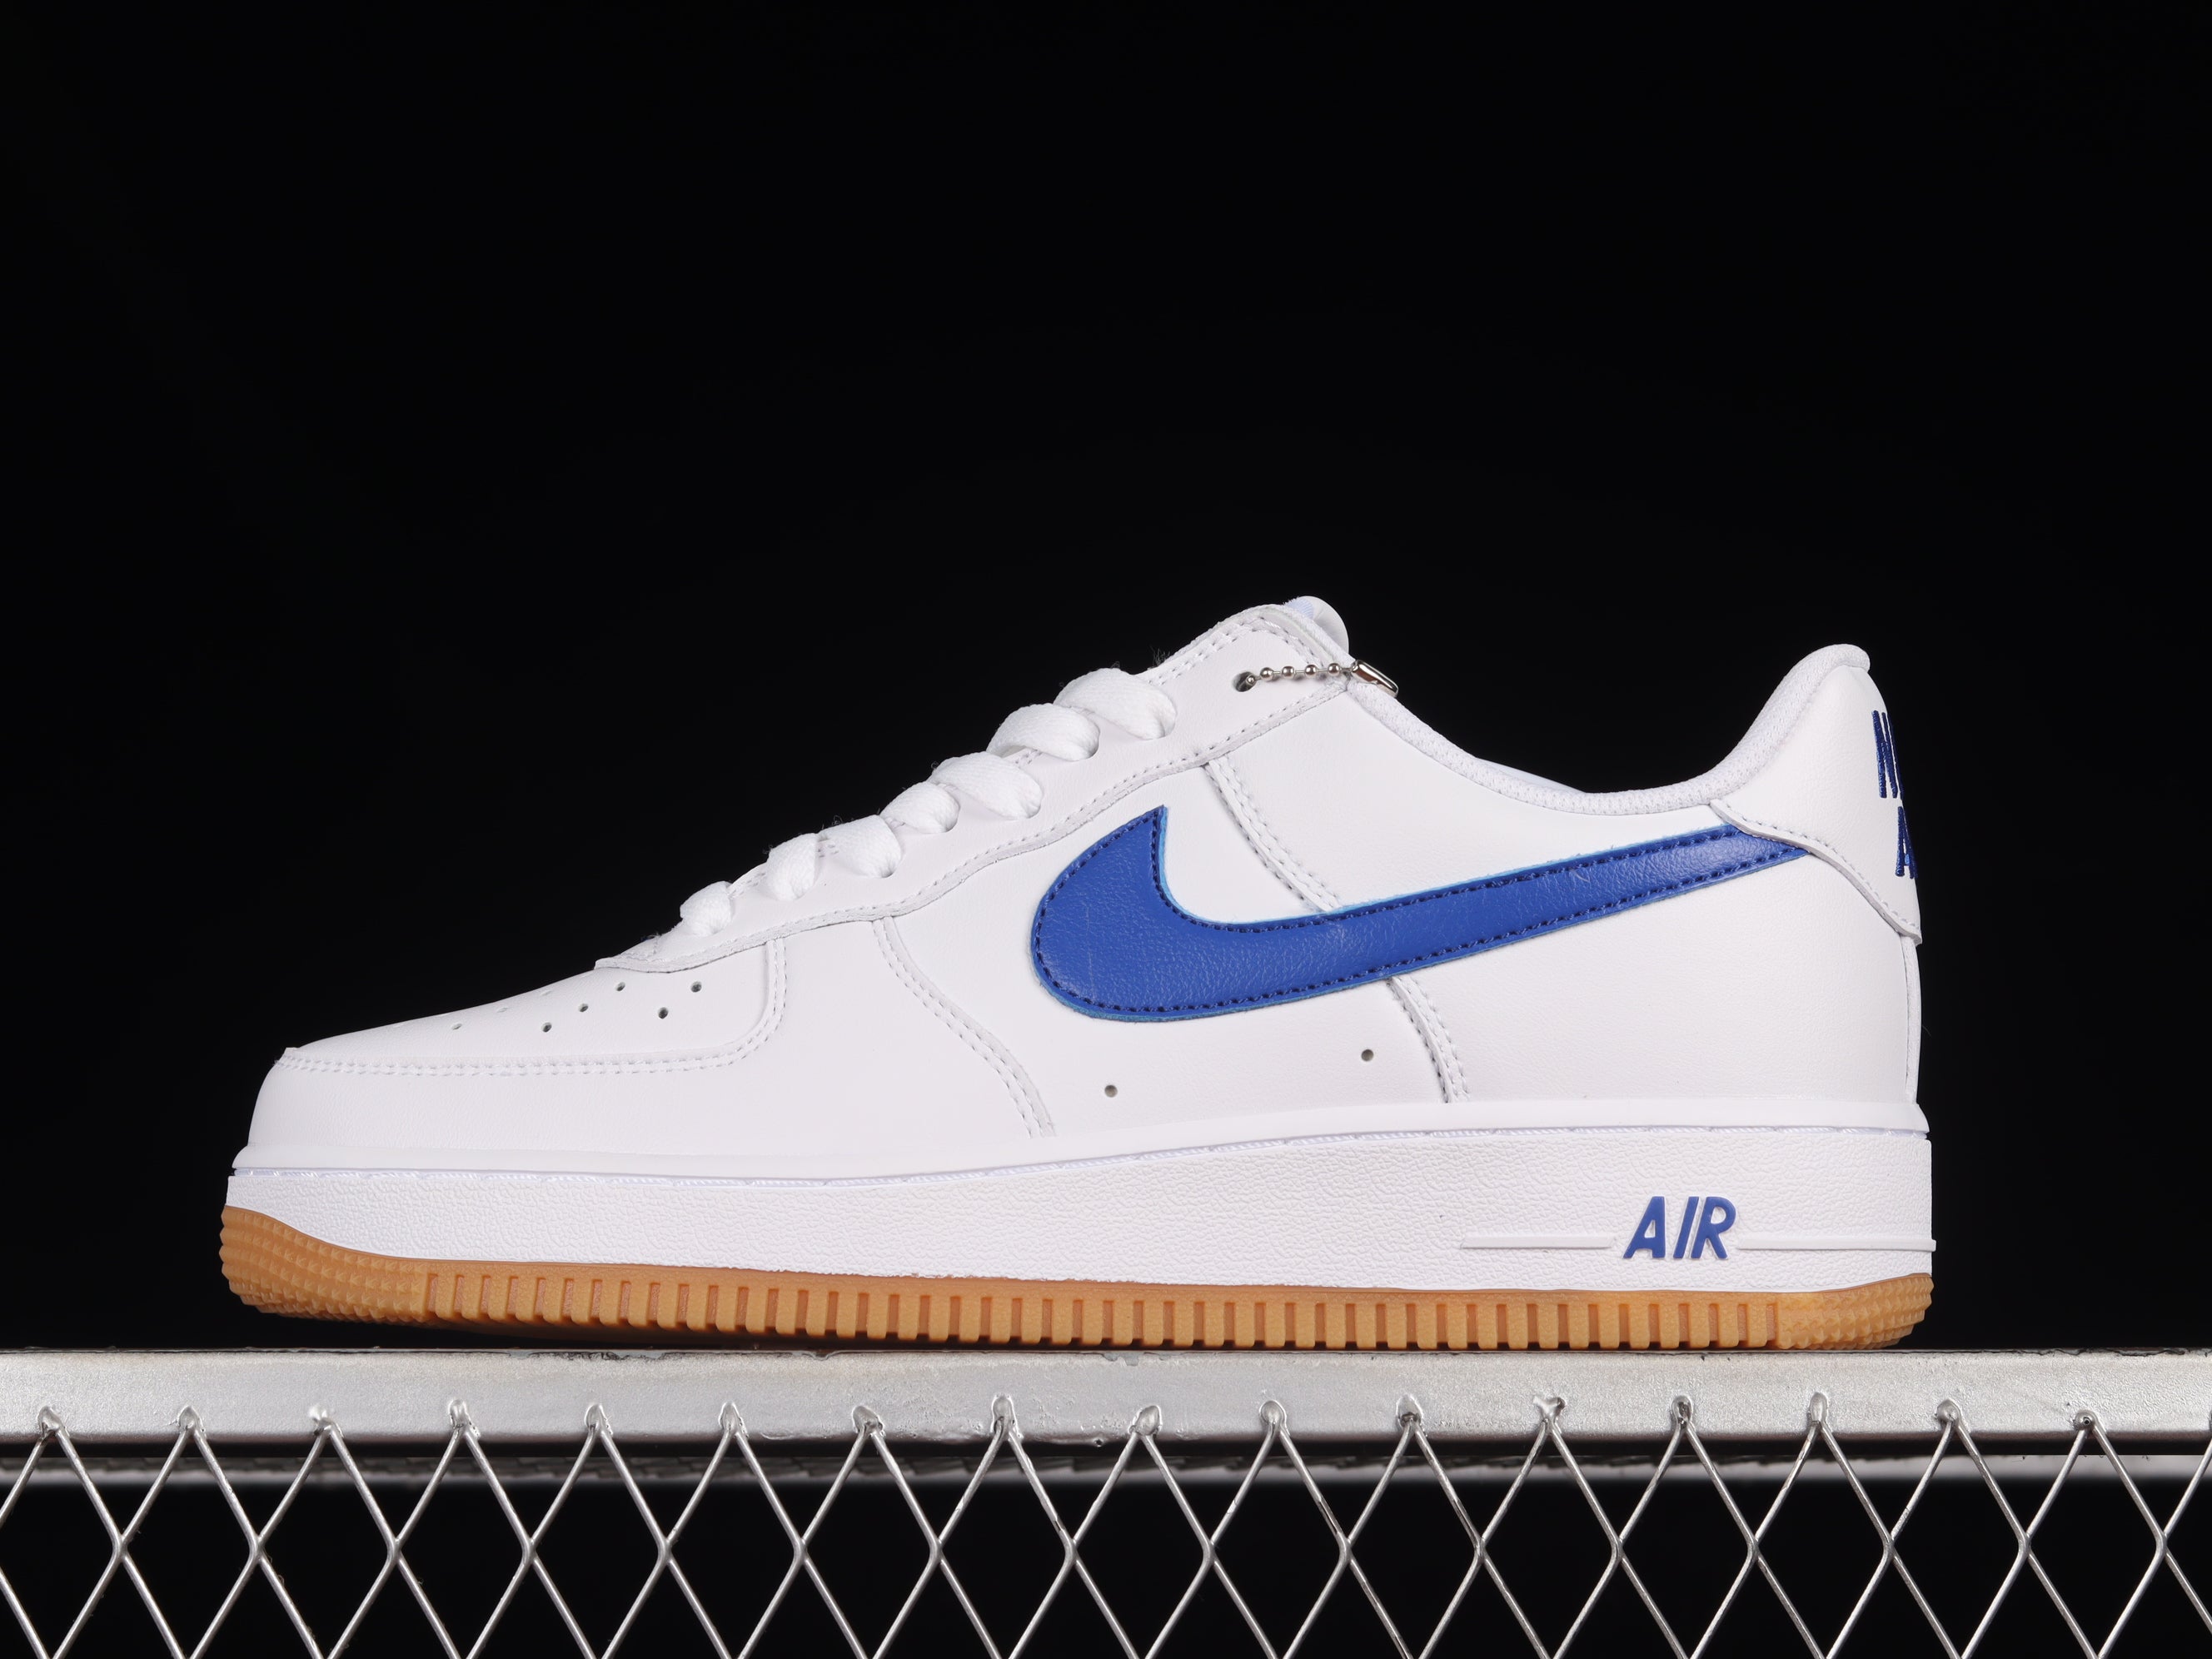 NikeMens Air force 1 AF1 Low Retro - White